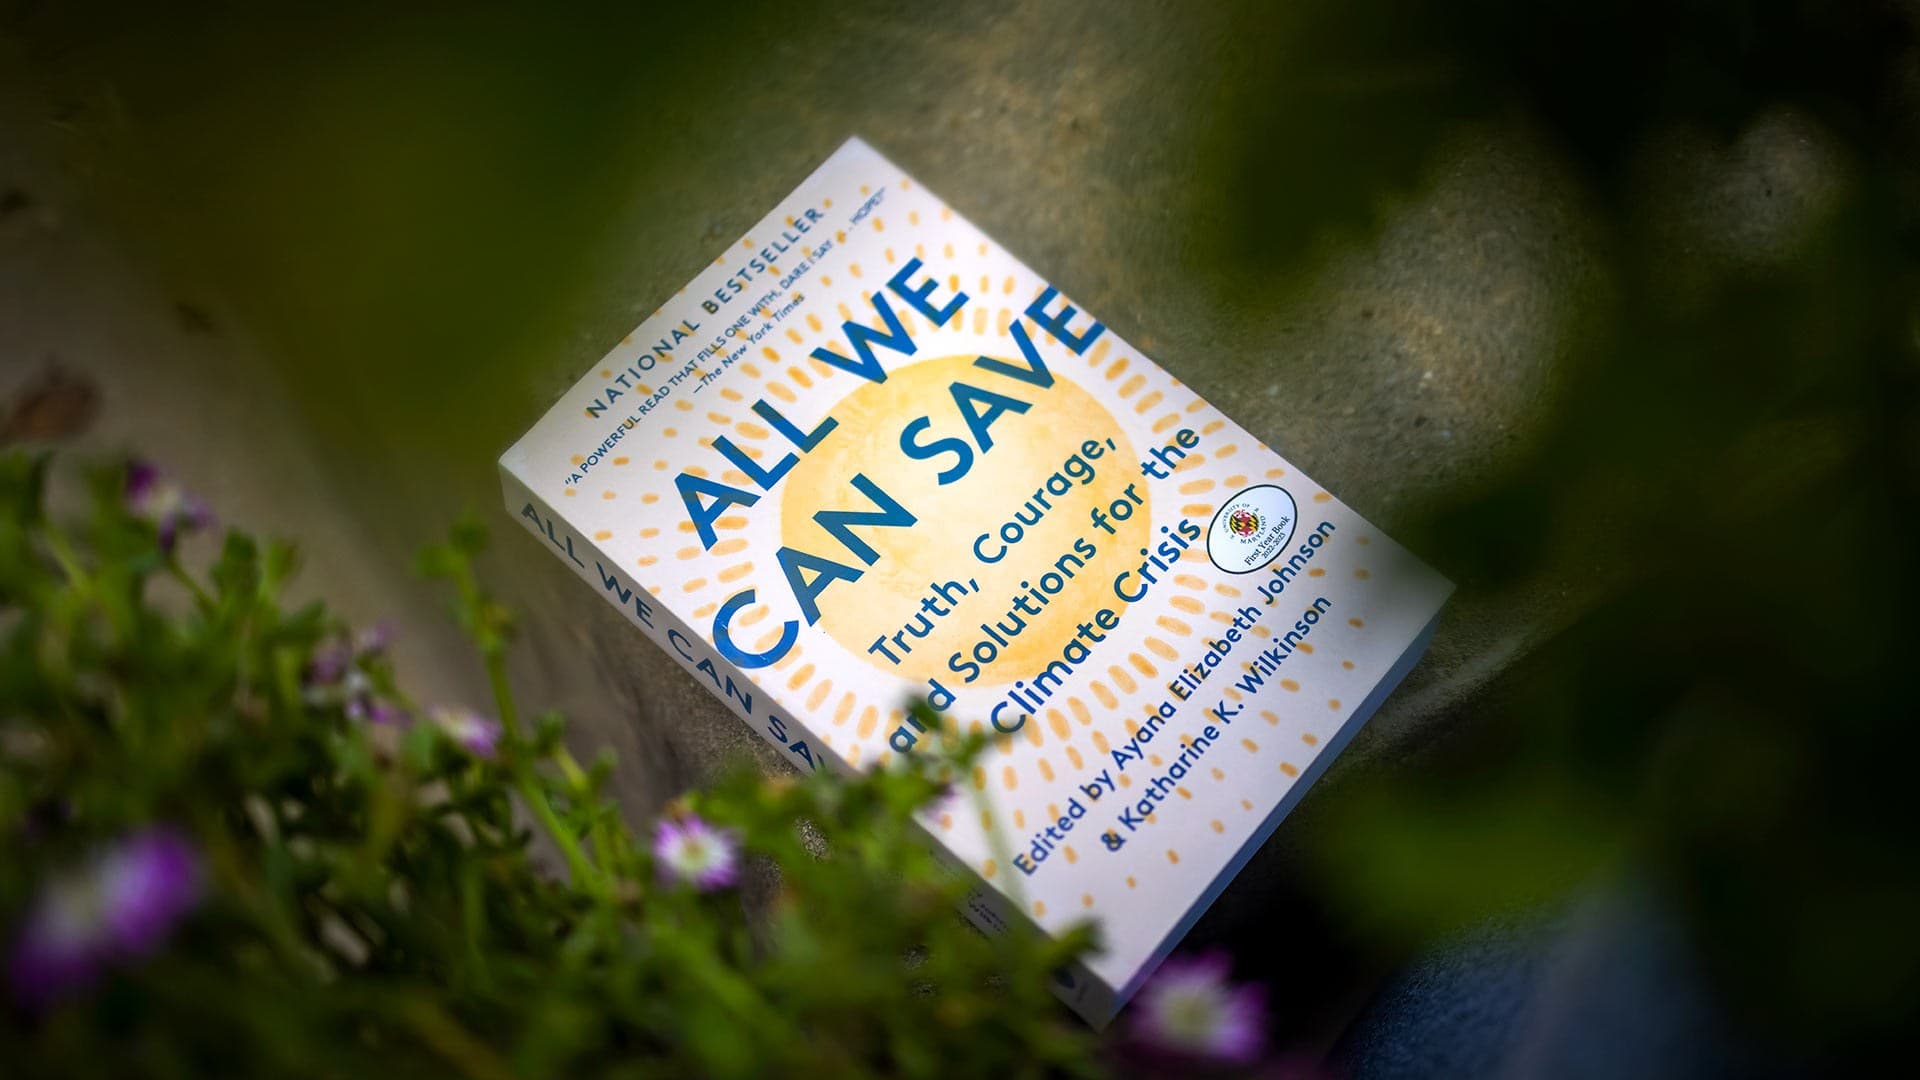 "All We Can Save" book